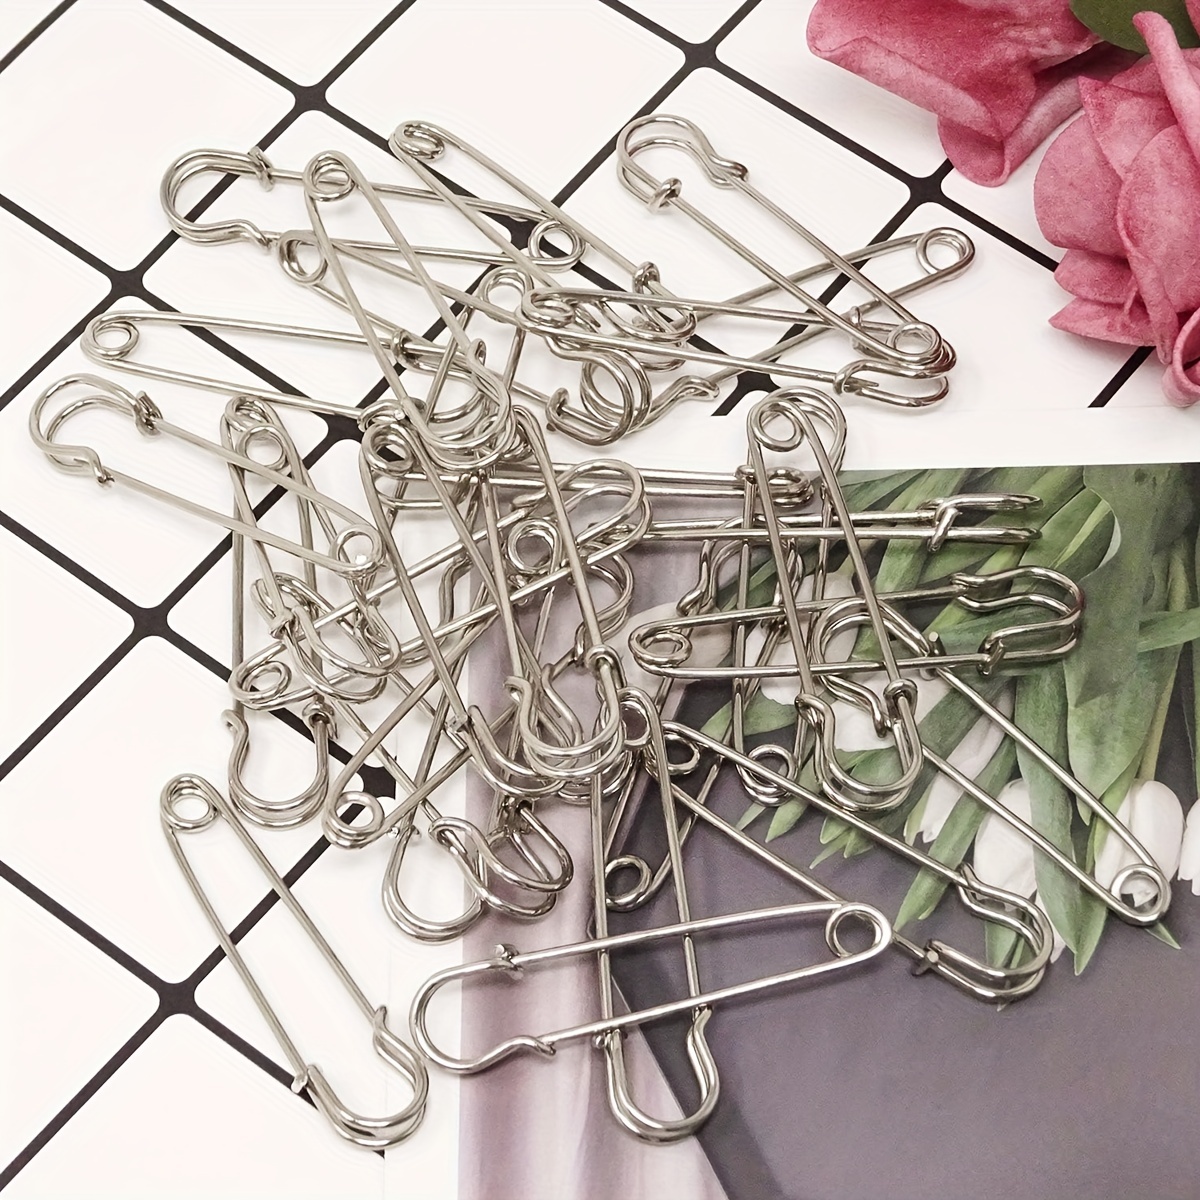 30 Pack Large Safety Pins, 2.75 Heavy Duty Blanket Pins for All Kinds of  Handicrafts, Clothing, Blankets and Other Materials as Well as DIY